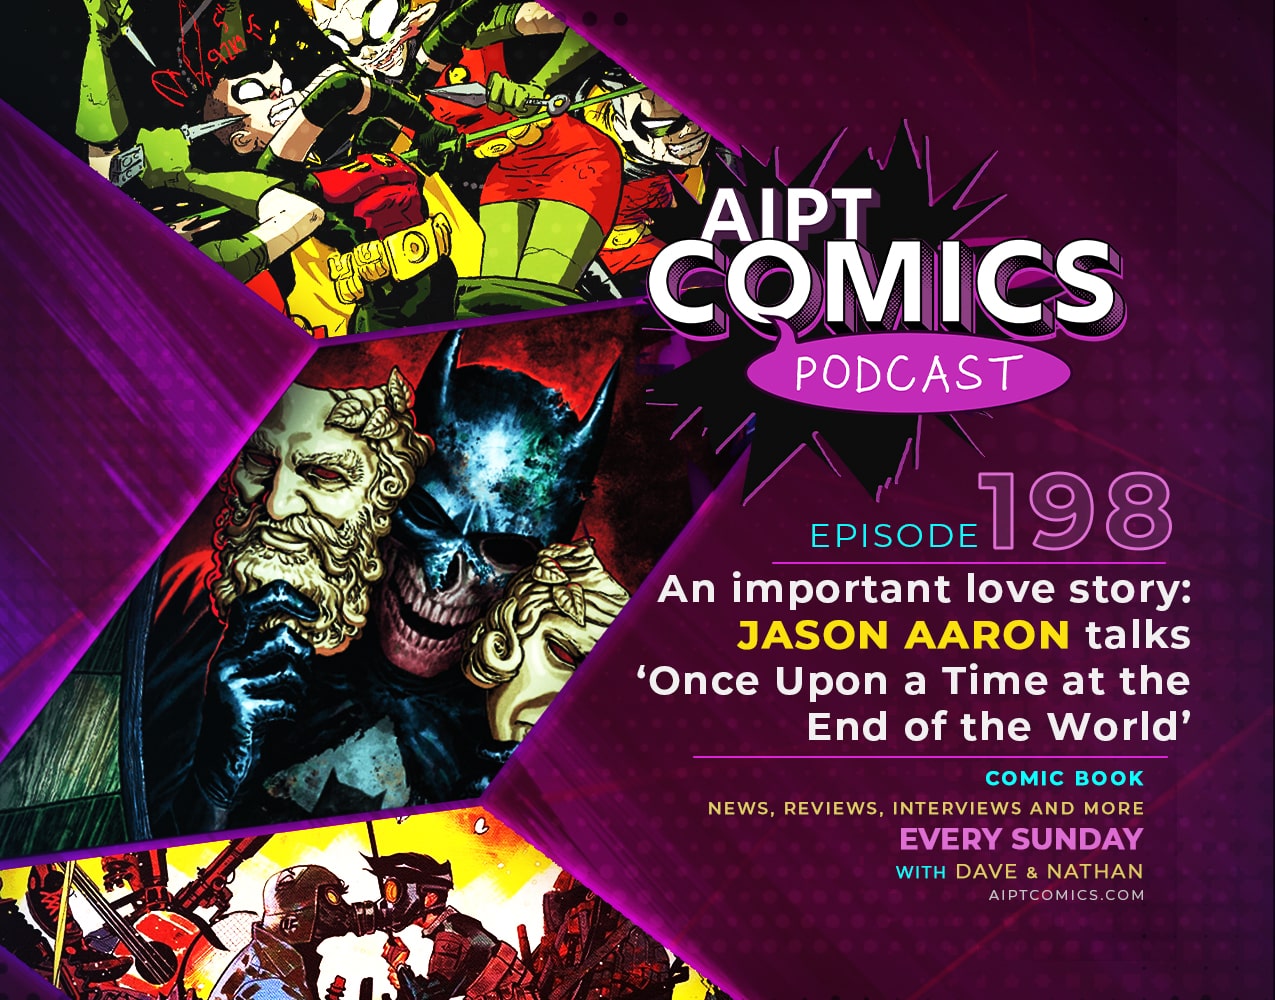 AIPT Comics Podcast episode 198: An important love story: Jason Aaron talks 'Once Upon a Time at the End of the World’